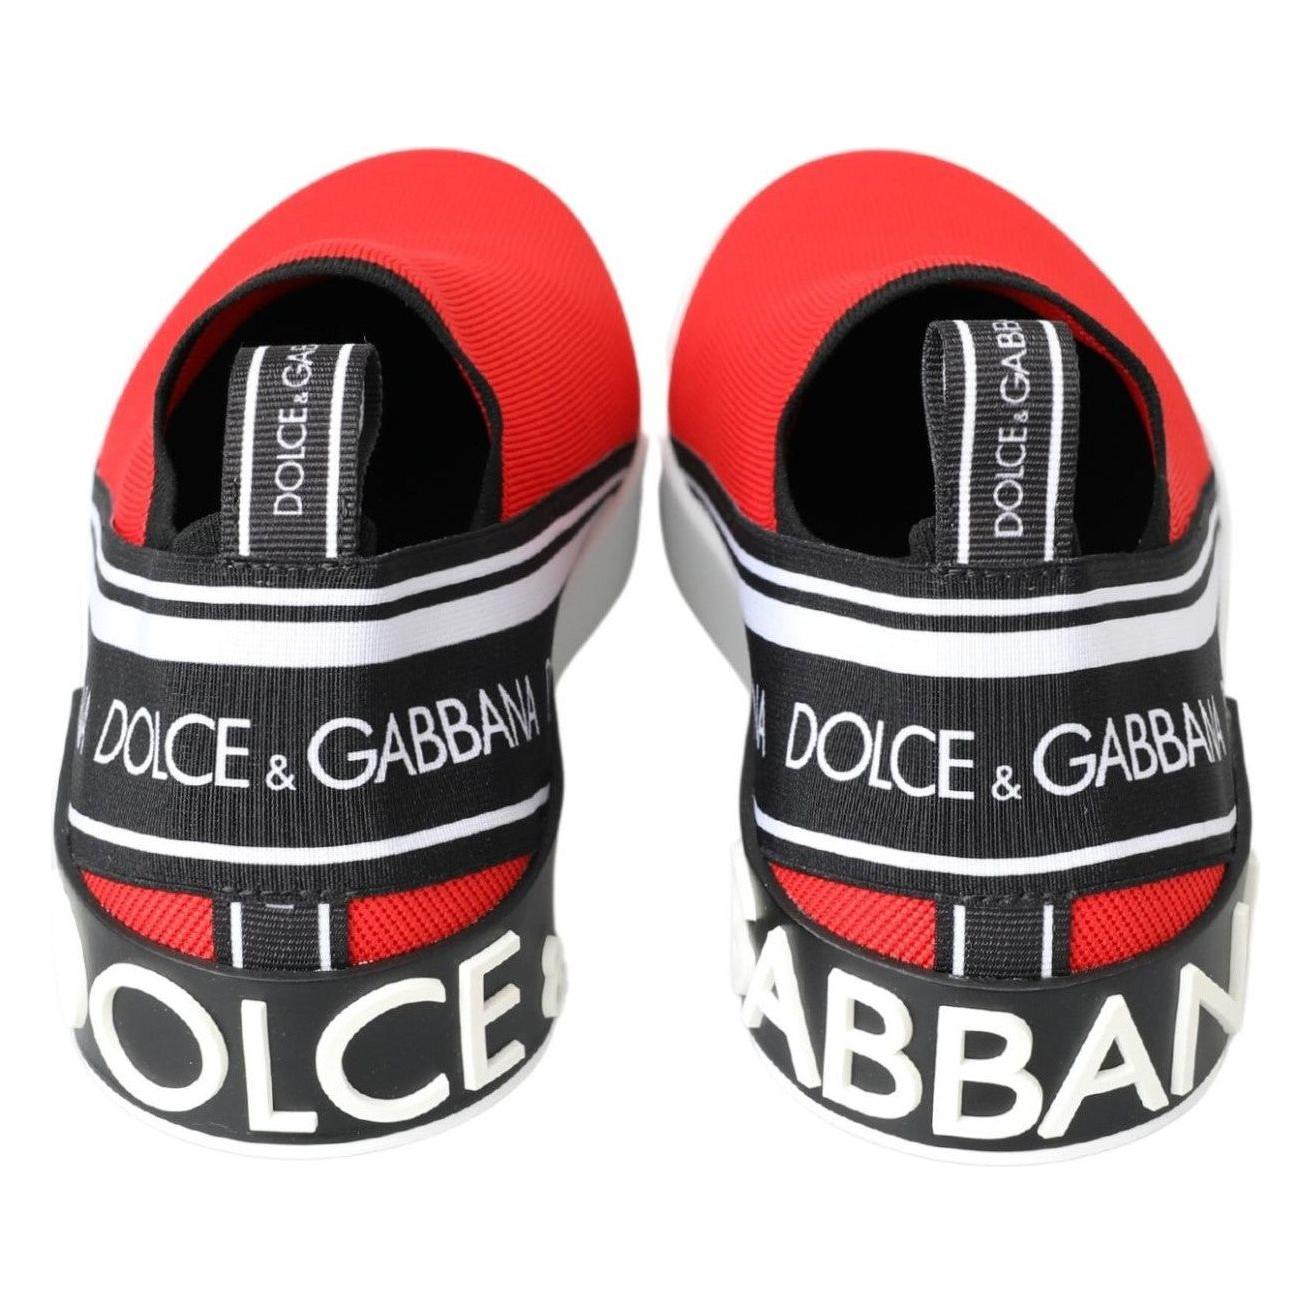 Dolce & Gabbana Elegant Tri-Tone Loafers for Men red-white-flat-sneakers-loafers-shoes